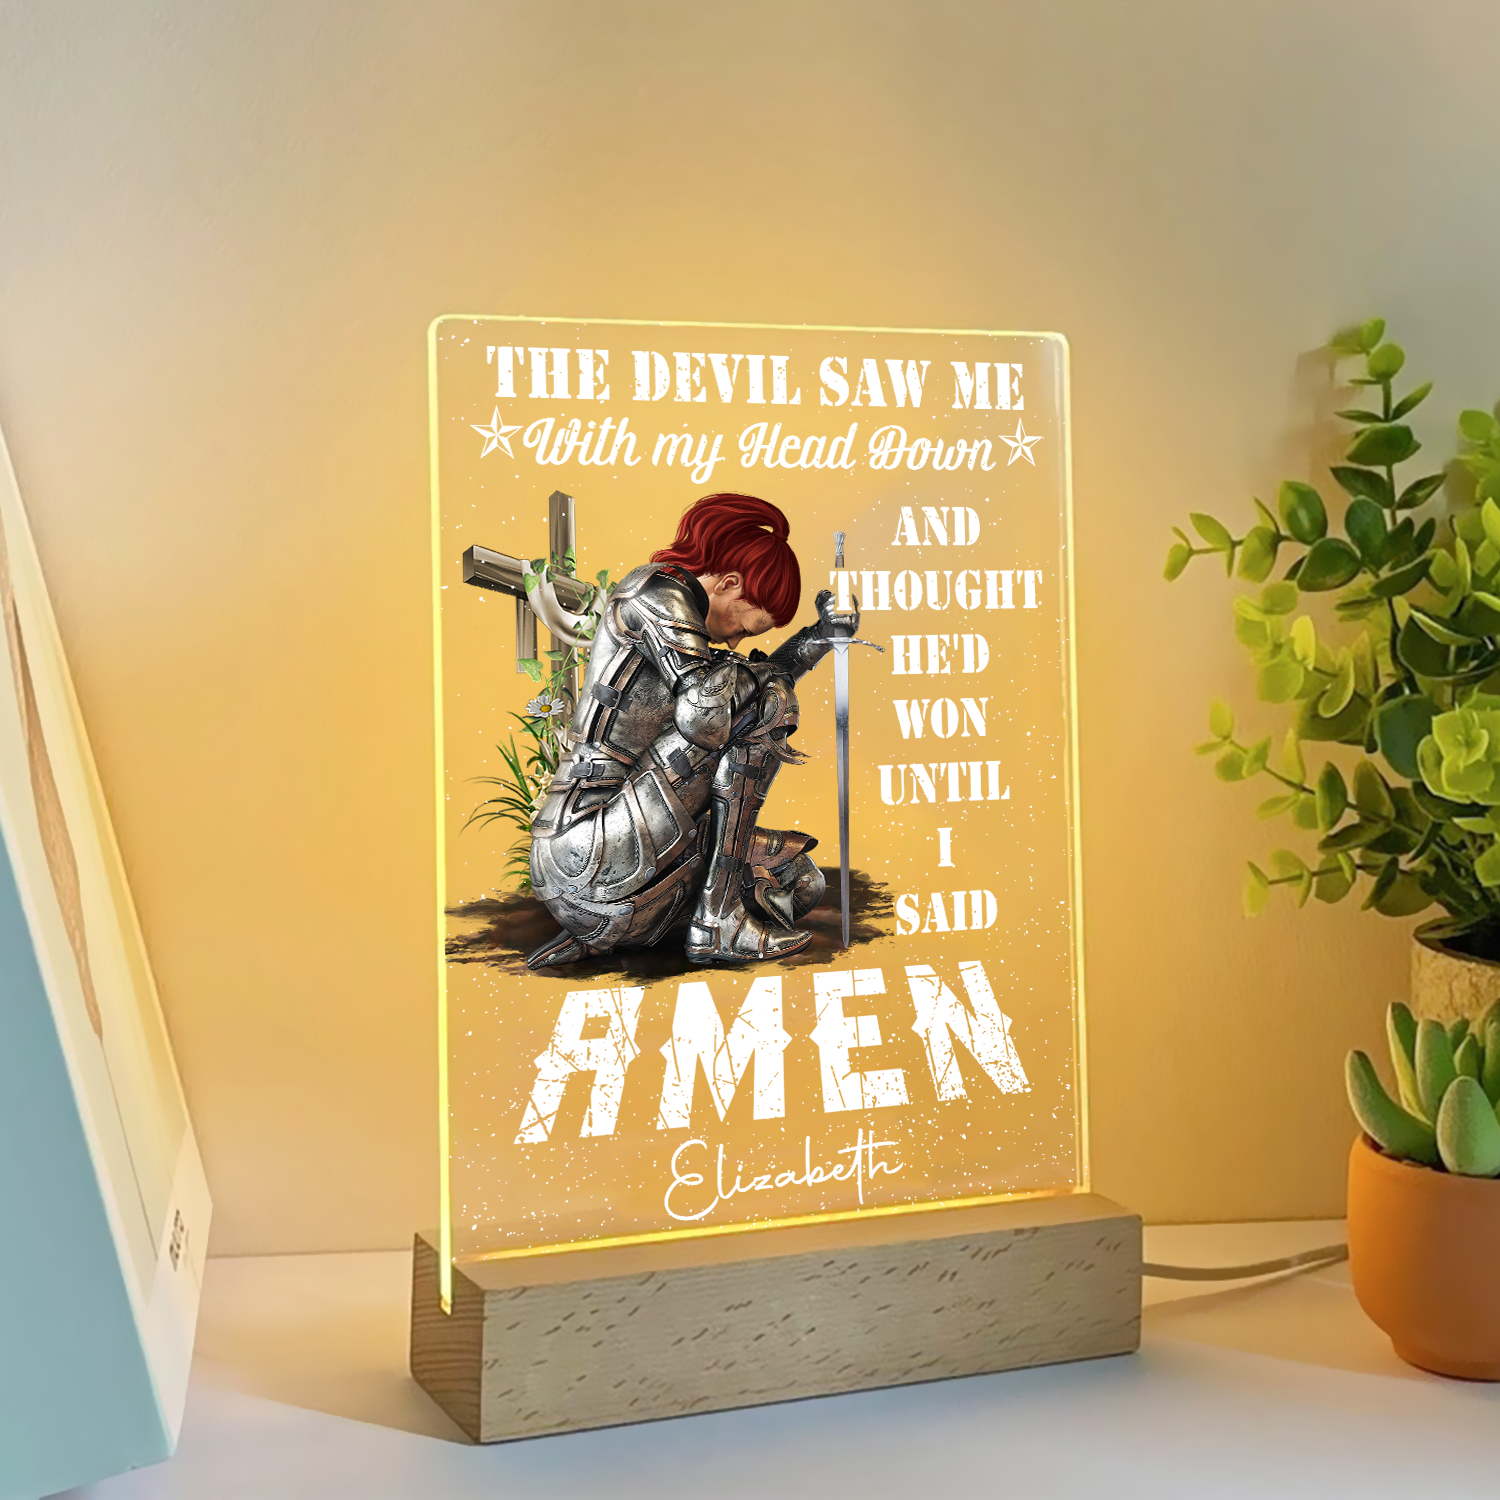 Personalized Woman Warrior Of God The Devil Saw Me With My Head Down And Though He Would Won Until I Said Amen Acrylic Plaque LED Light Night